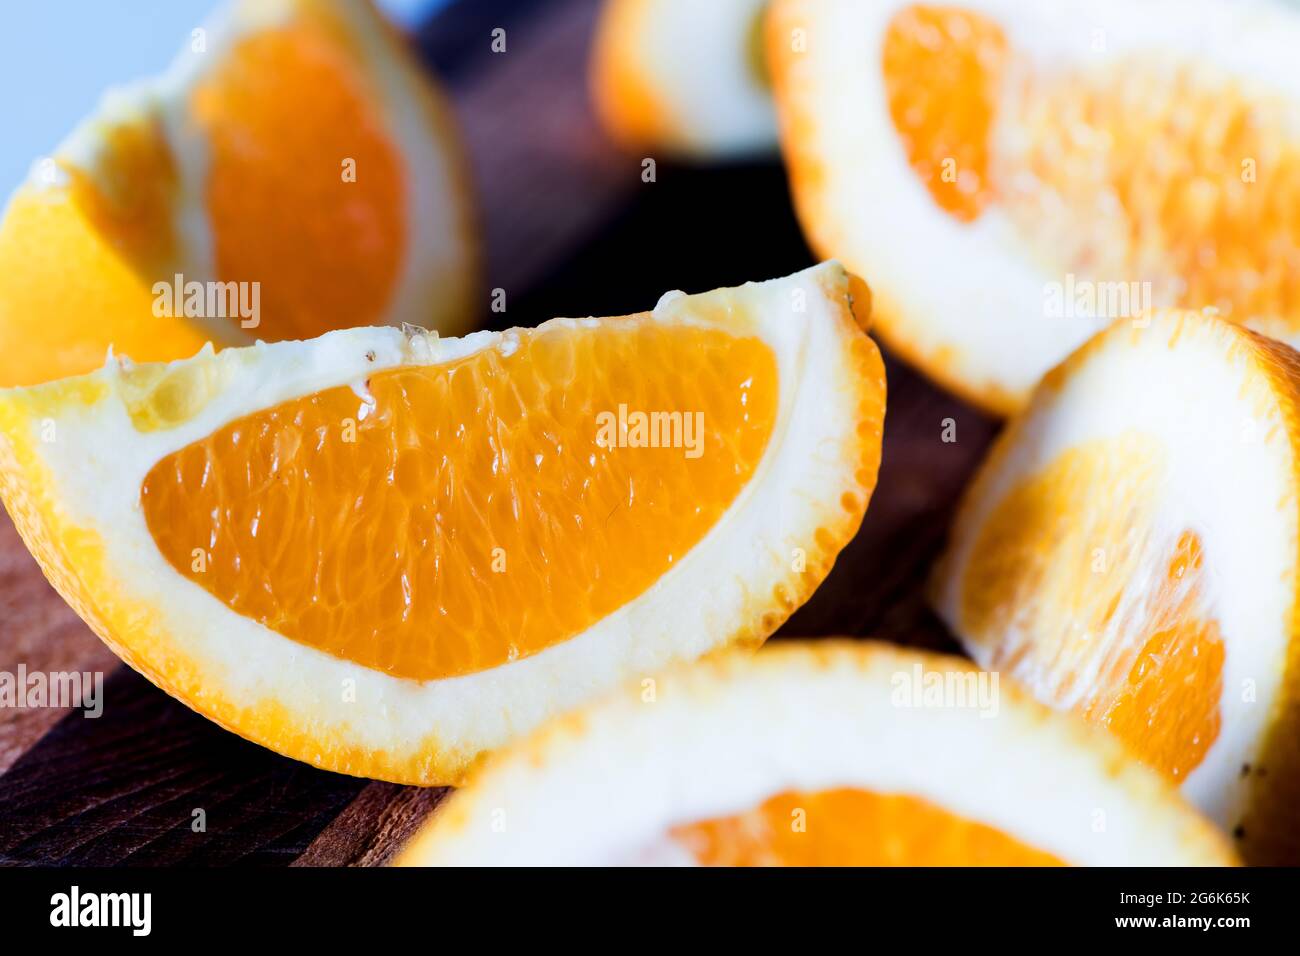 Orange wedges on a kitchen cutting board on blue background Stock Photo